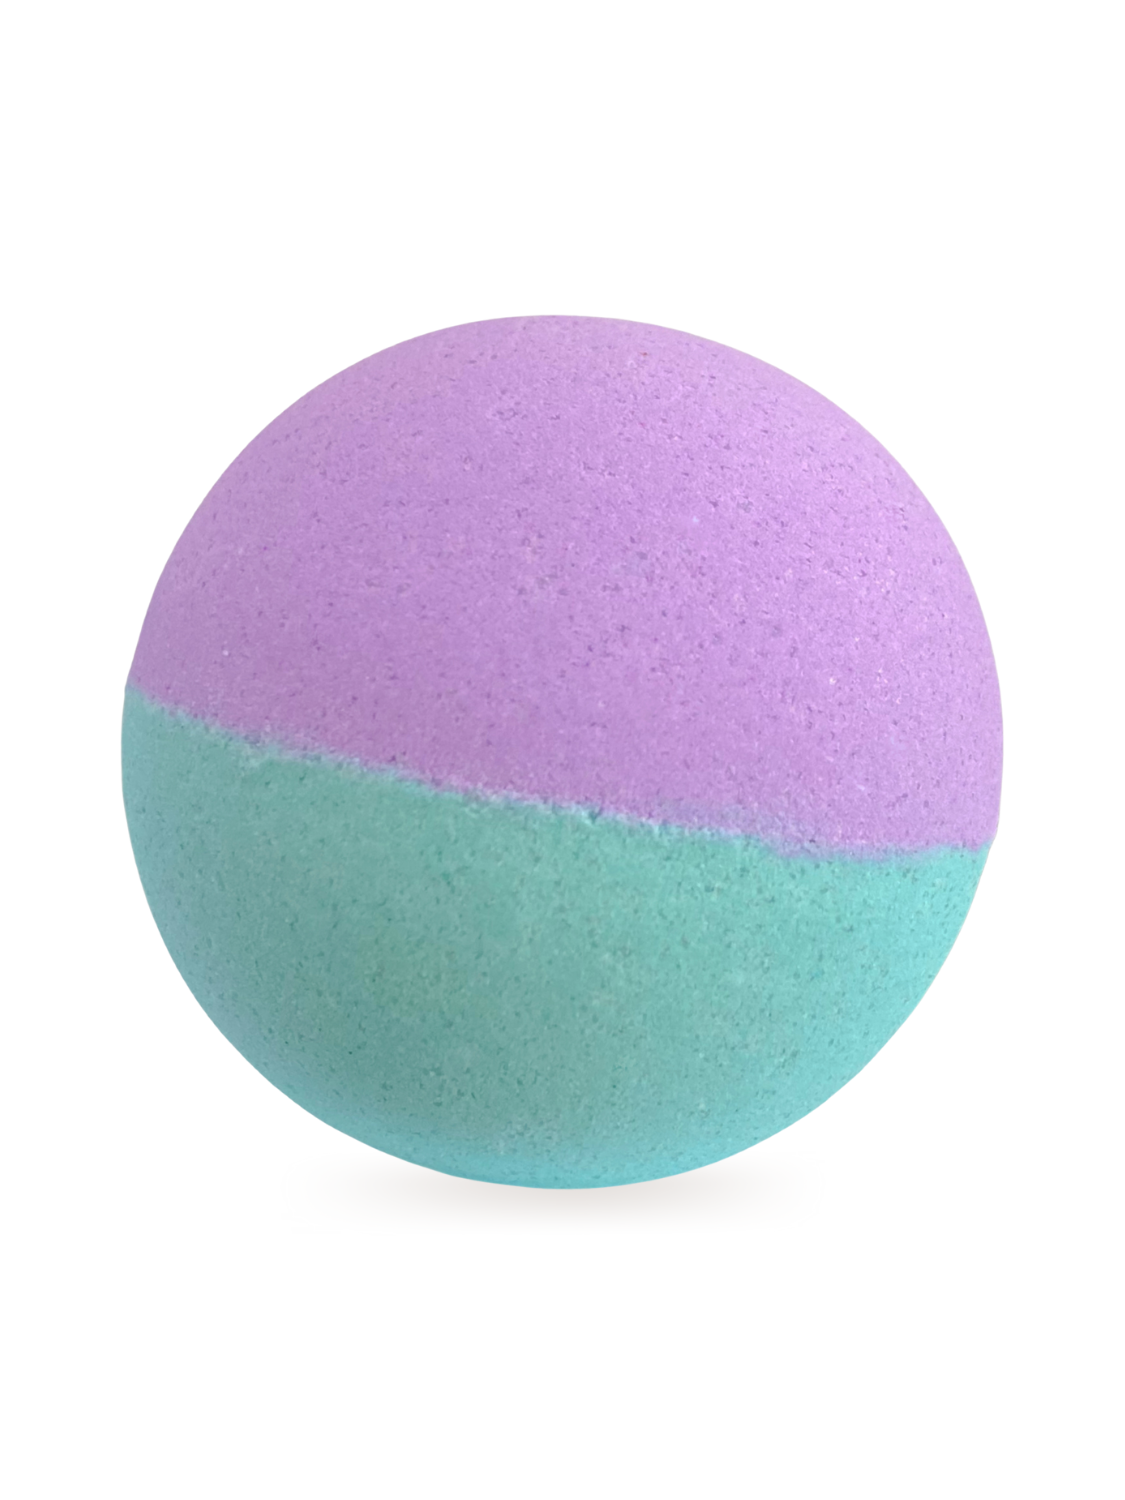 FROOTY BOOTY Bath Bomb by Bodyslick Singapore